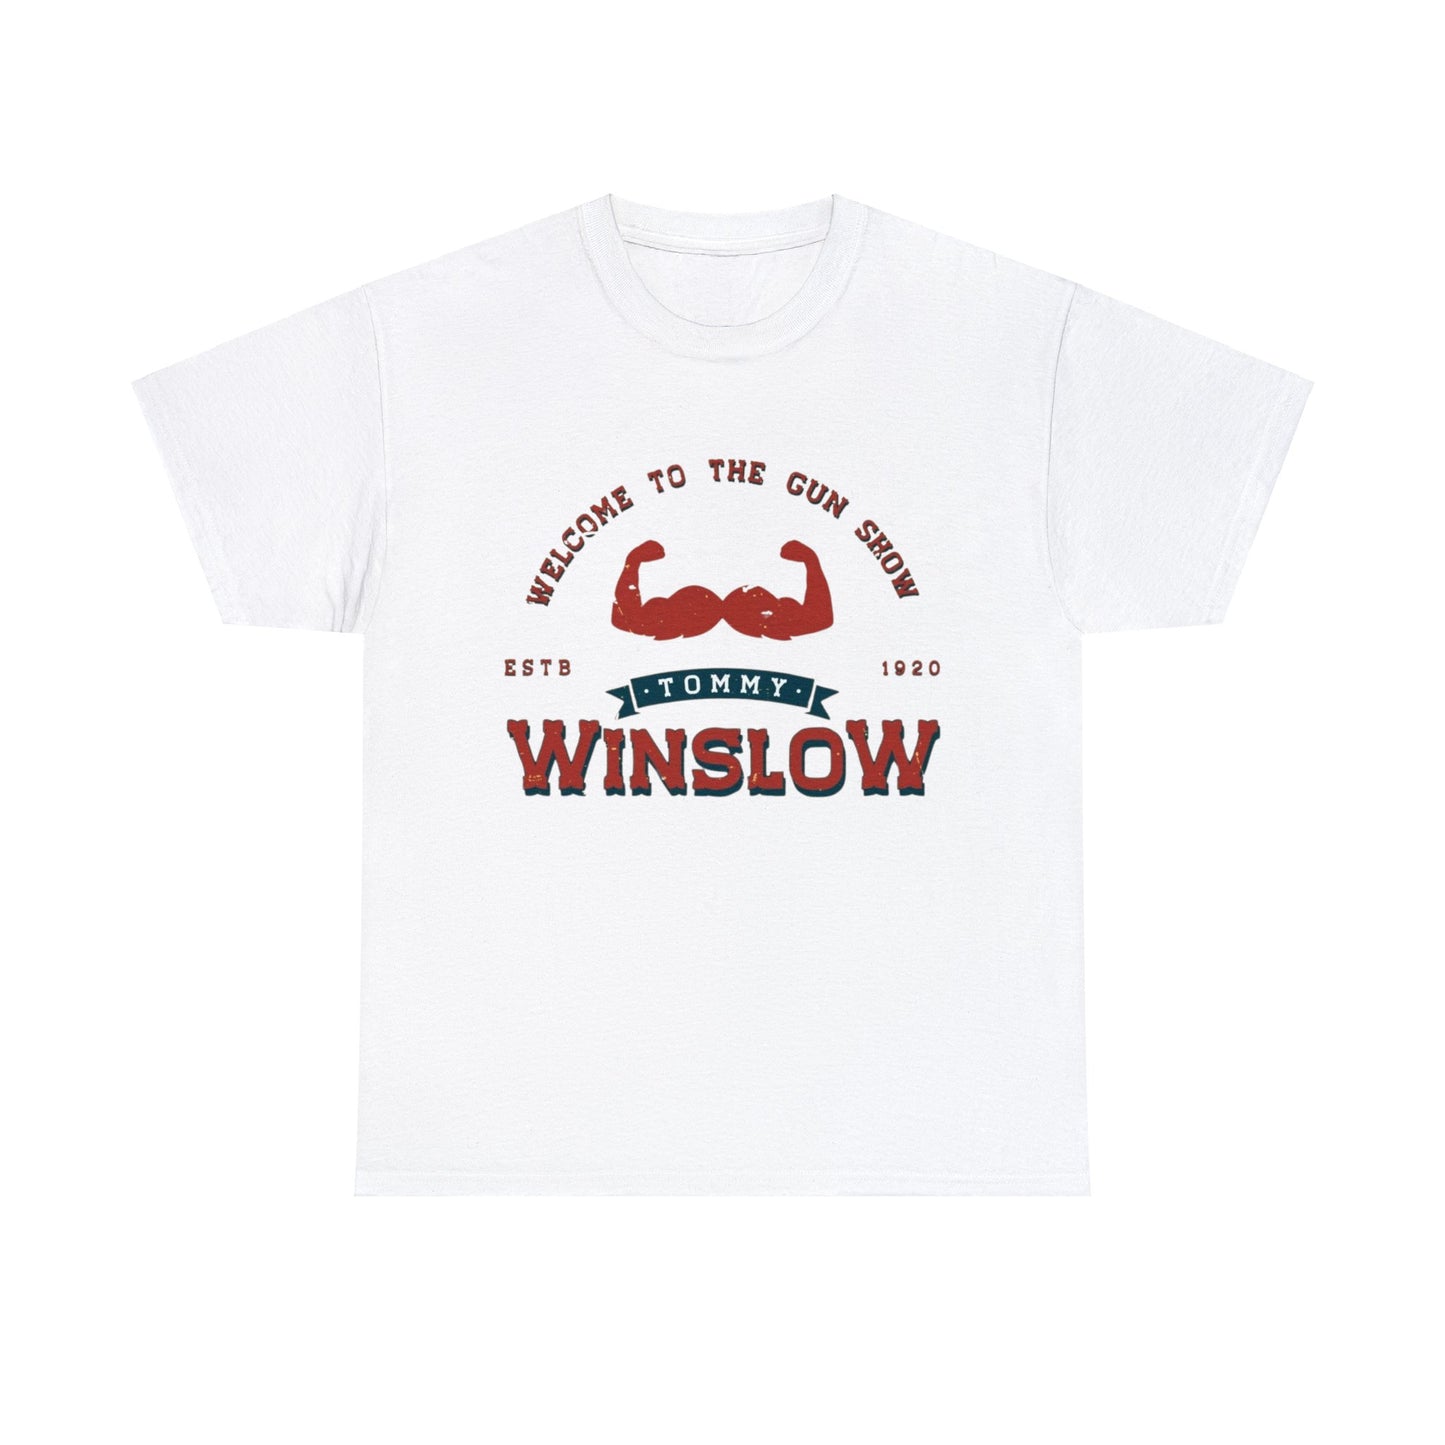 Tommy "The Gun" Winslow - 'Welcome to the gun show' Printed Tee